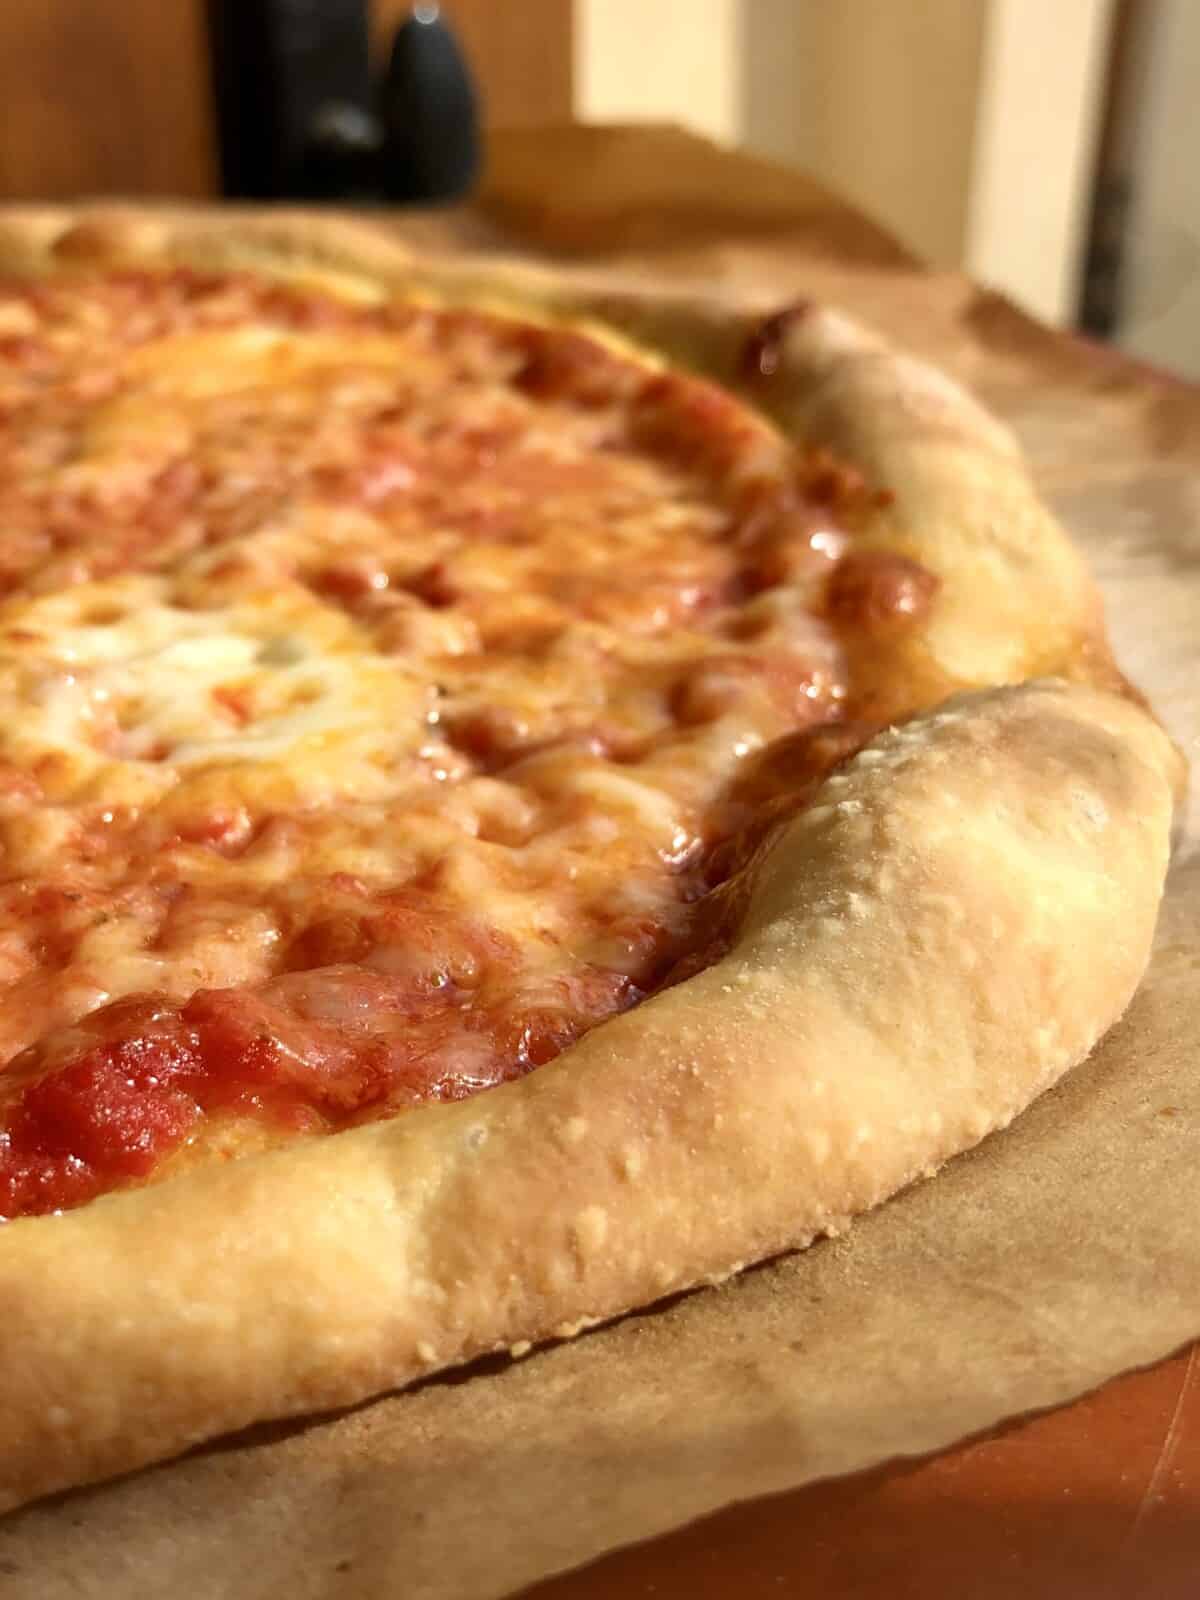 thick crust pizza recipe using 00 flour baked till golden brown with a perfectly puffy pizza crust (corniche).